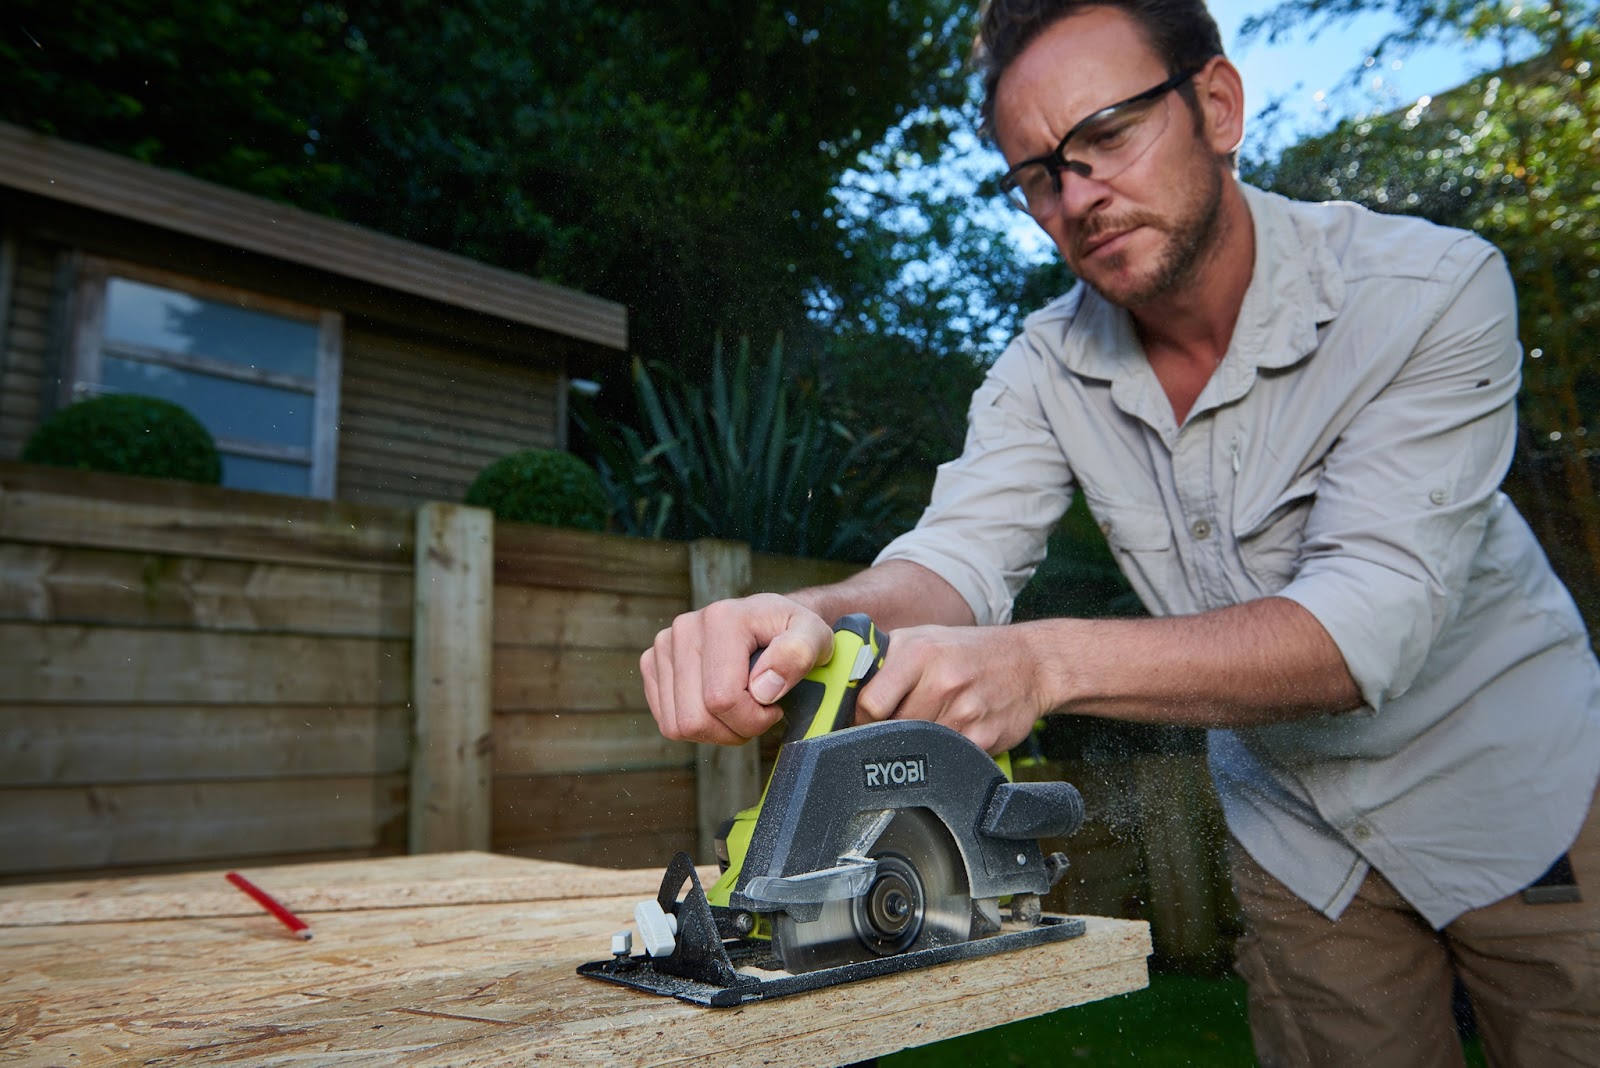 Man using power tool to grind wooden surface